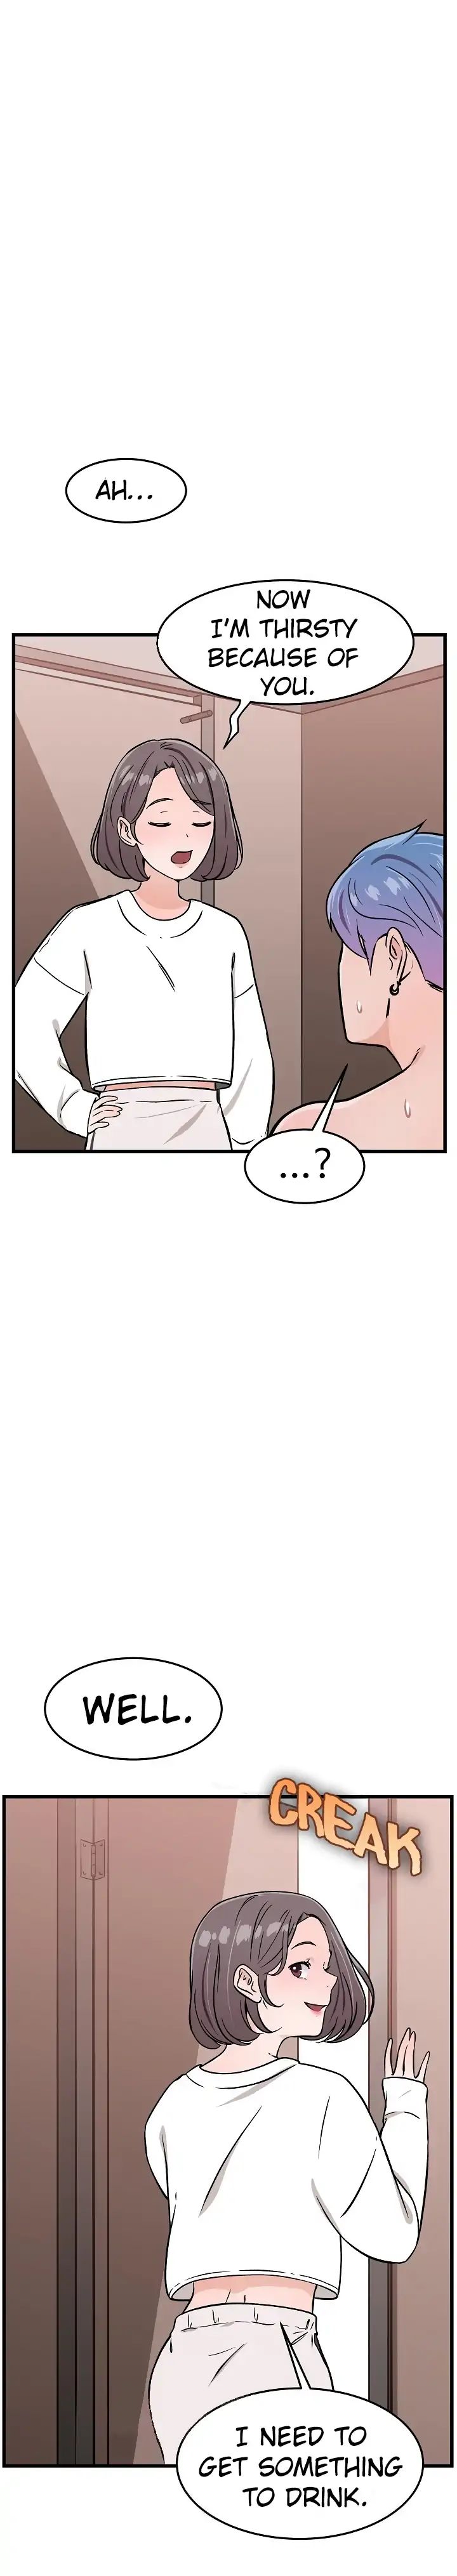 [Jangmi] Let's Try SM With Me! Ch.1-2 [English] [EnaEnaTusukScans] page 50 full